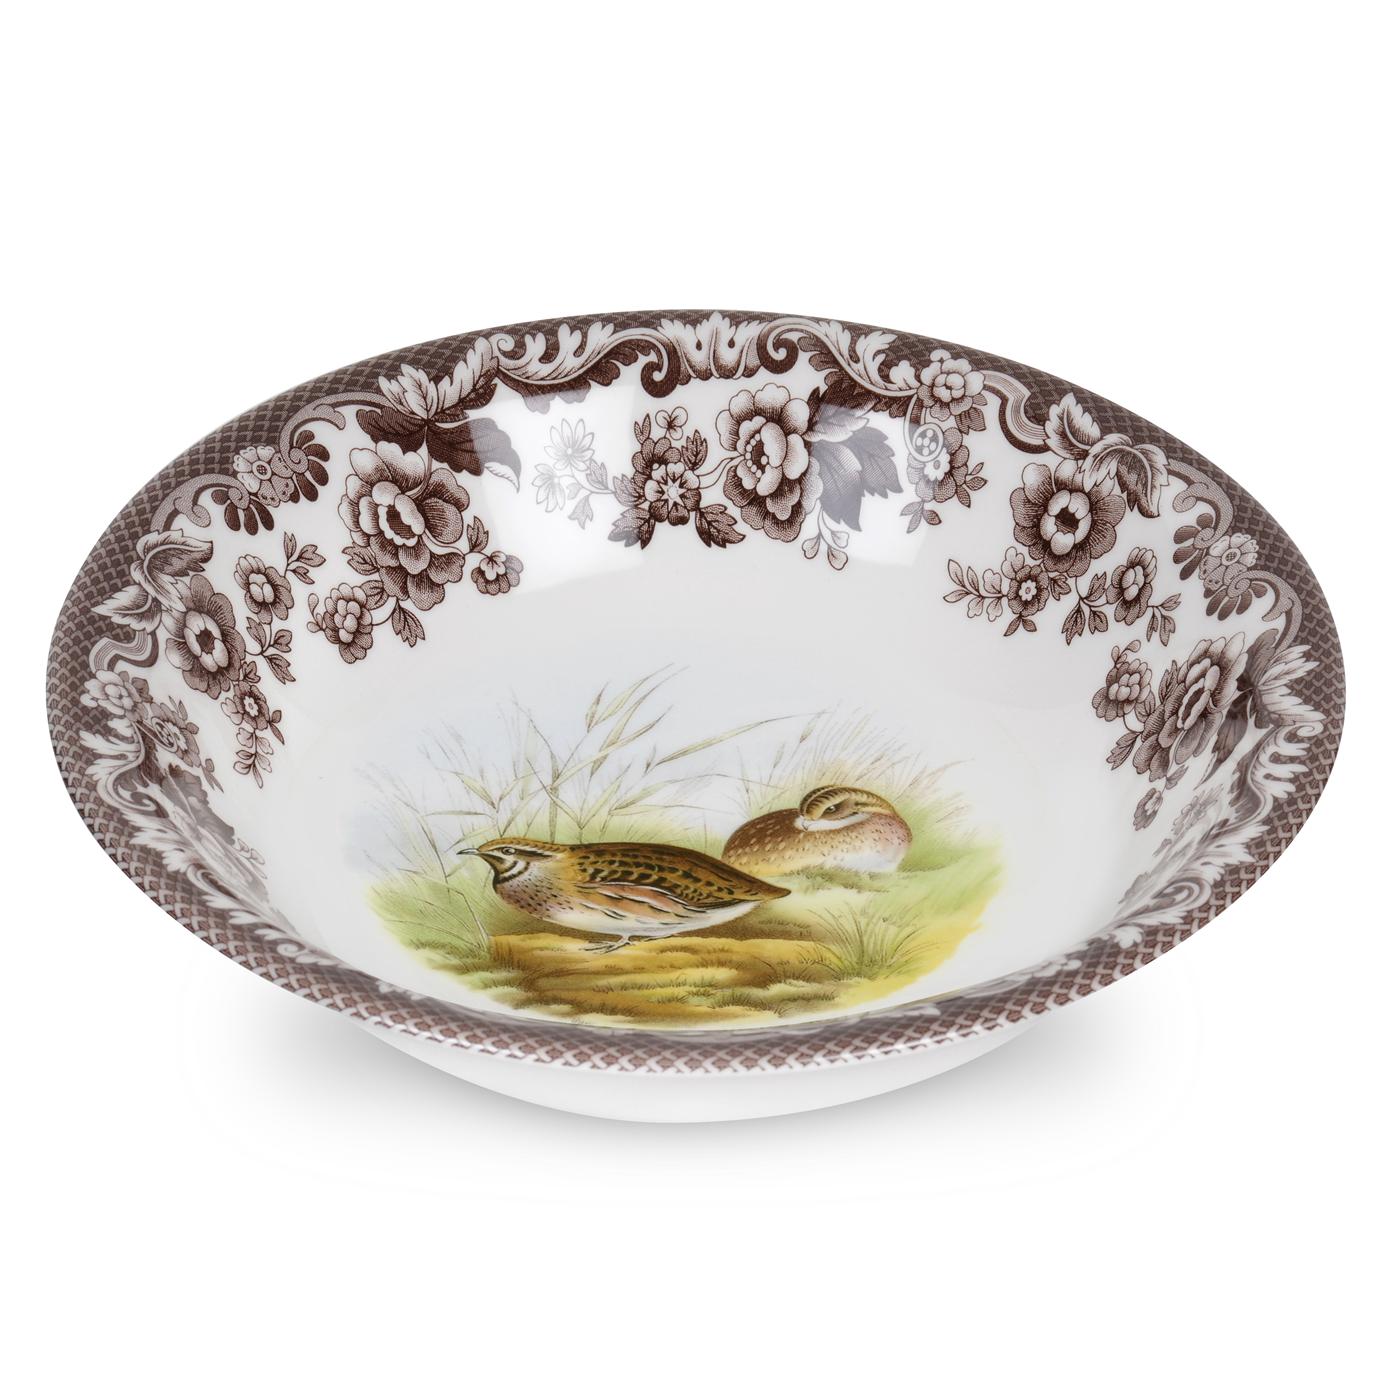 Spode Woodland Ascot Cereal Bowl 8 Inch (Quail) image number null